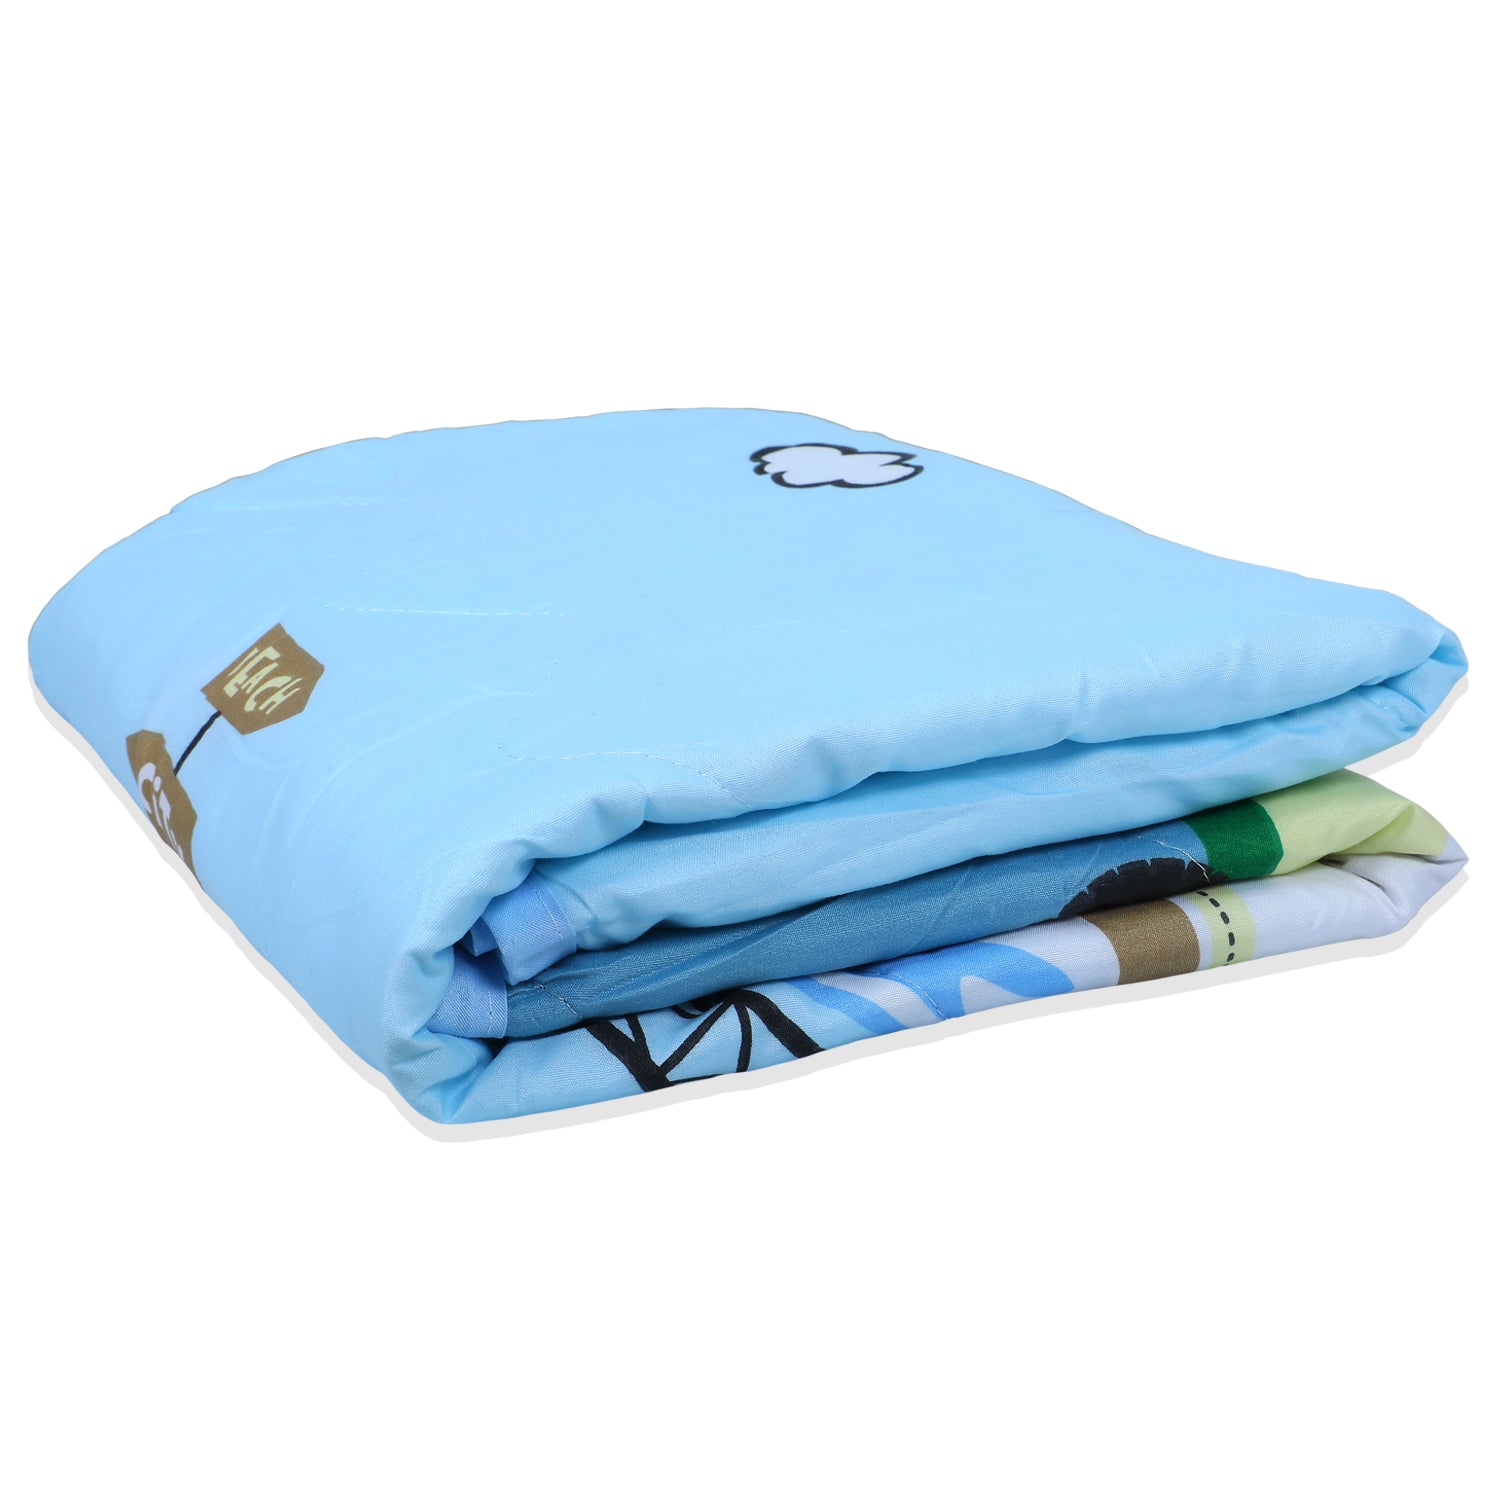 Baby Moo Farm Construction Soft Quilted Premium Reversible Blanket - Blue - Baby Moo